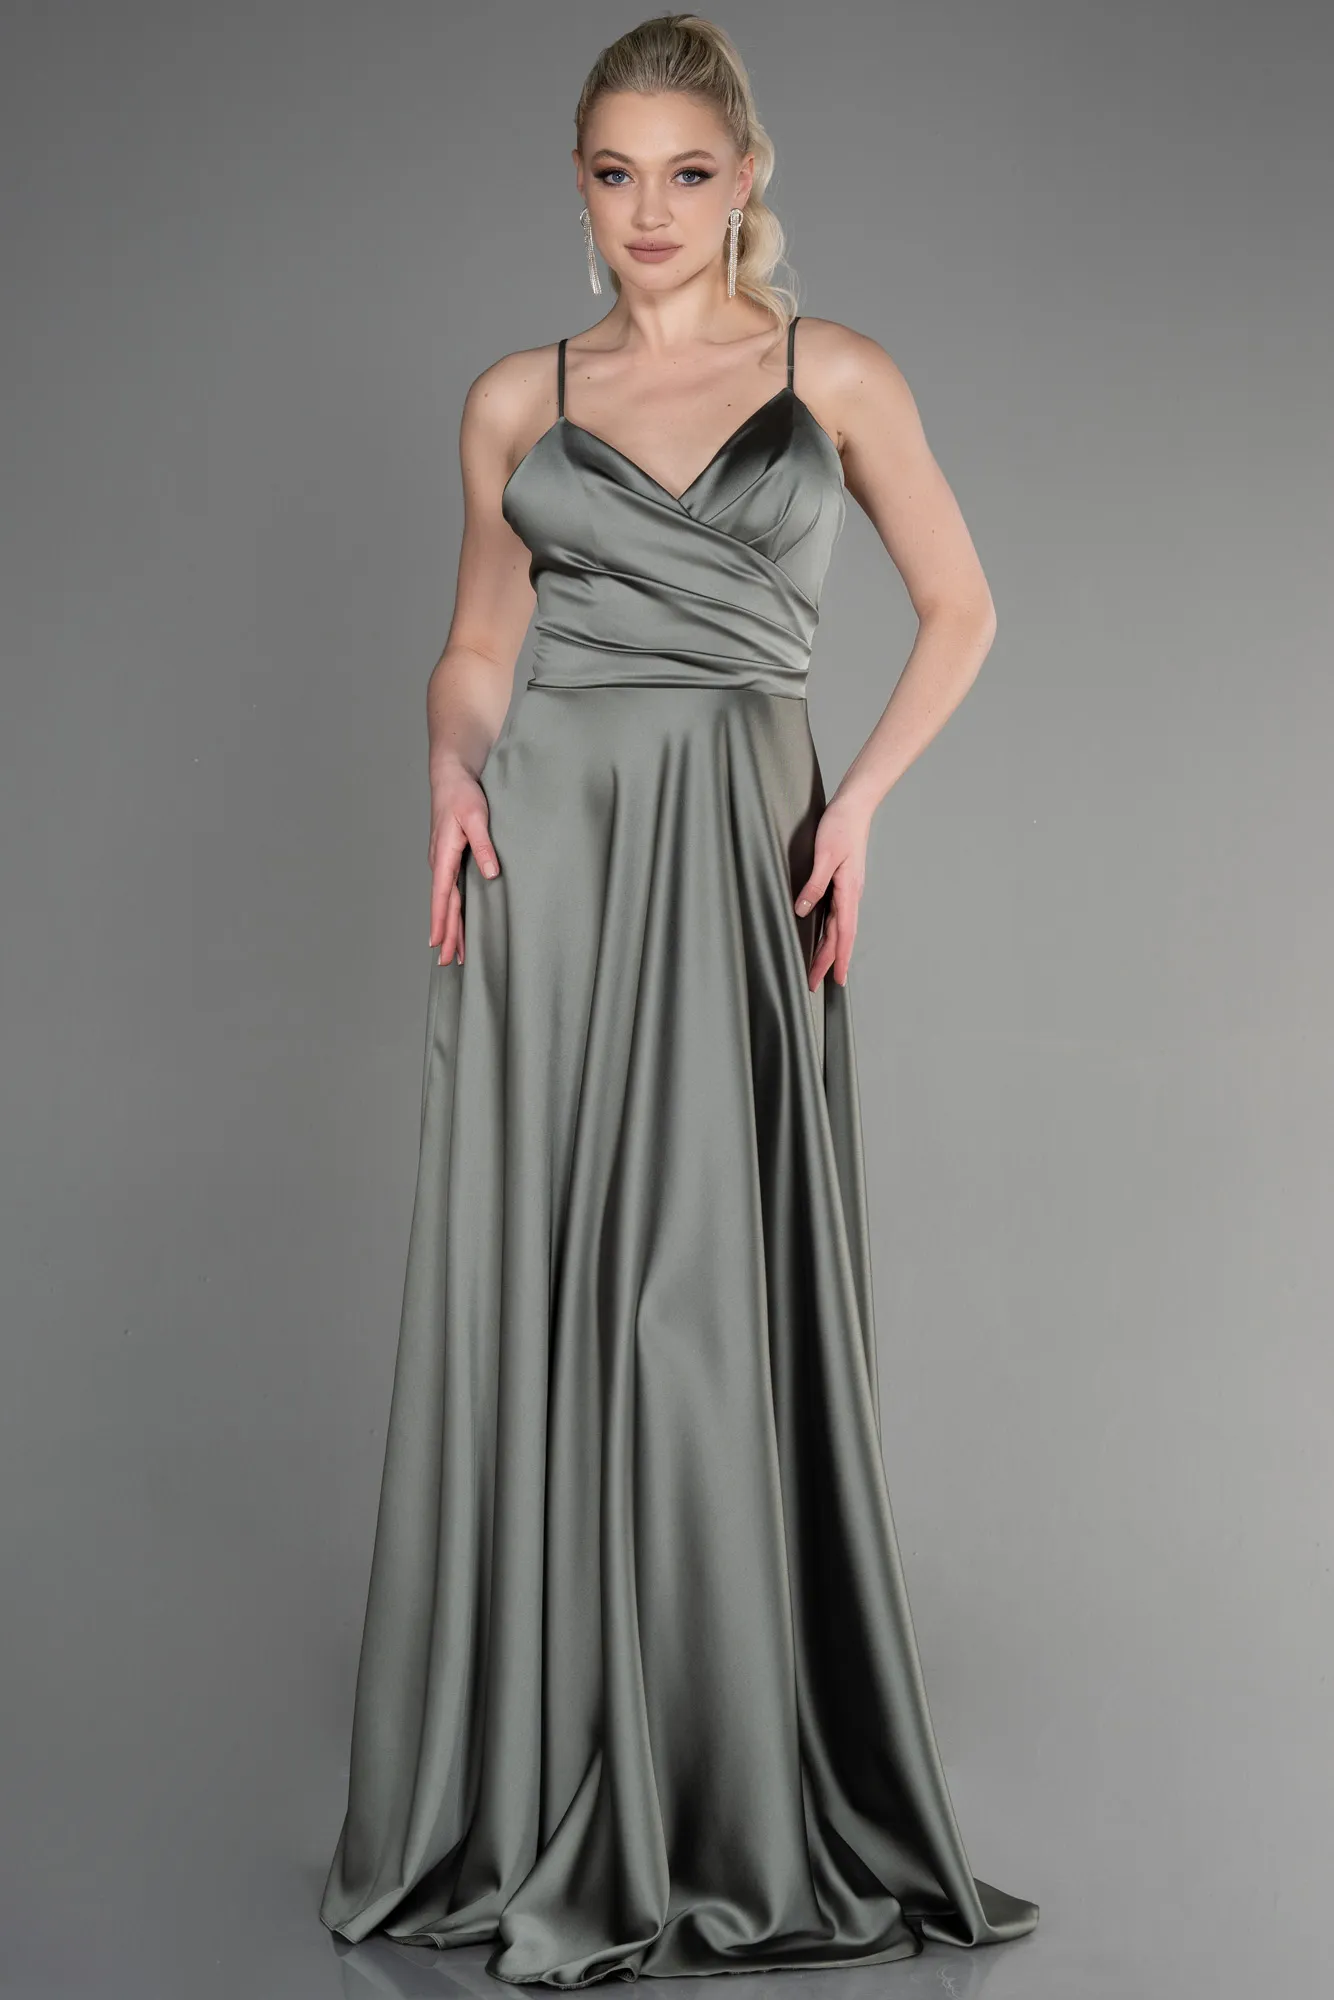 Olive Drab-Long Satin Prom Gown ABU3610